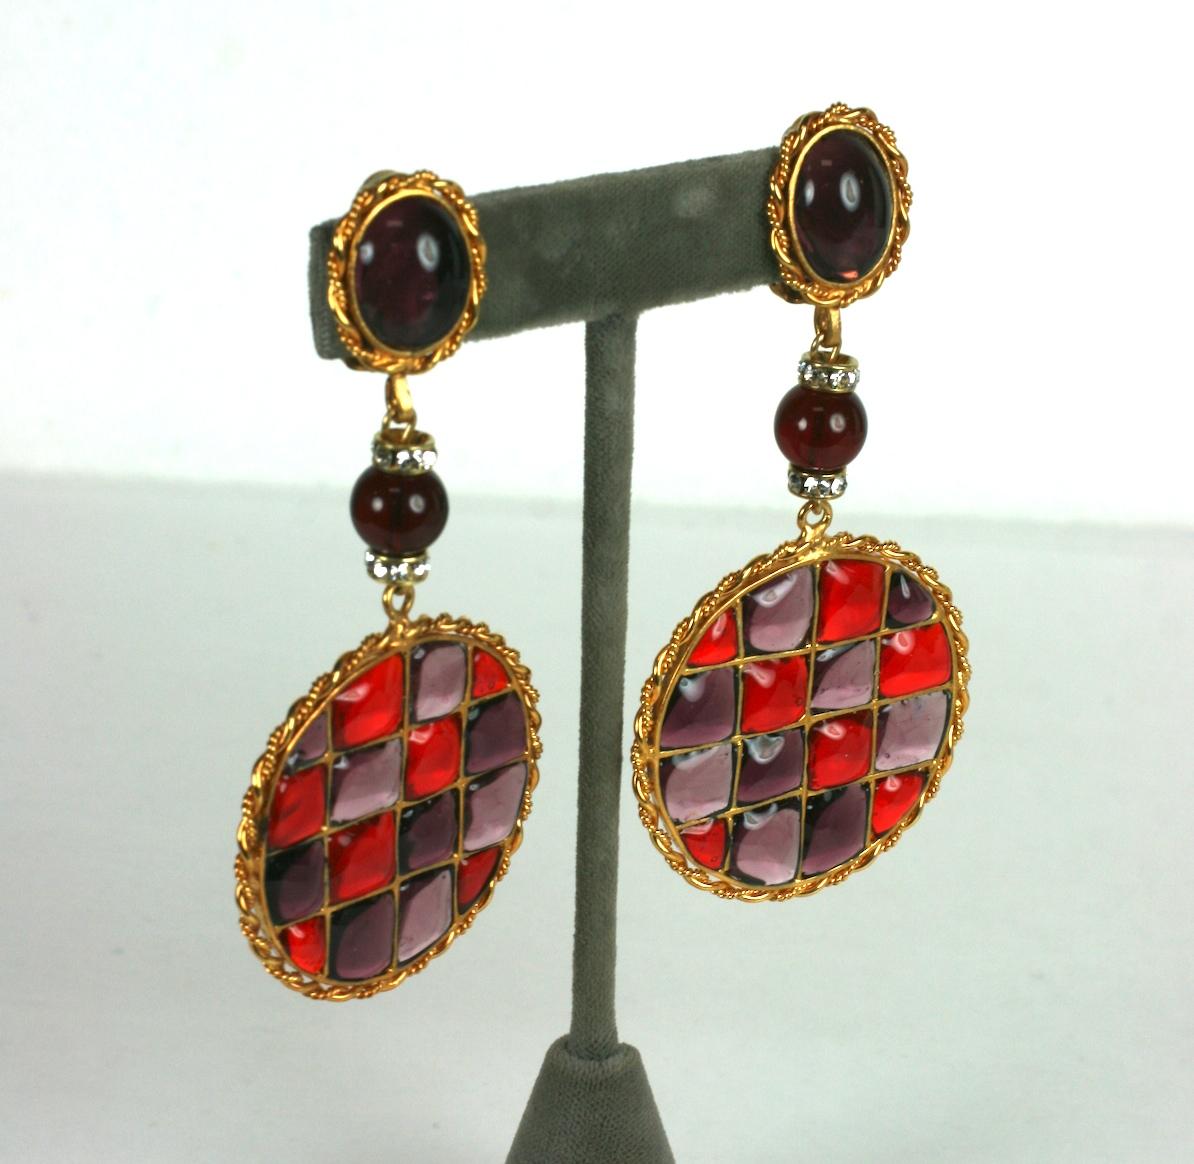 Rare intricate Maison Gripoix masterpiece earrings for Chanel Haute Couture, checked to imitate tweed in patterned poured glass. Of a handmade gilt plate bronze grid, with ruby and dark and pale amythest poured glass. Connector is round ruby glass